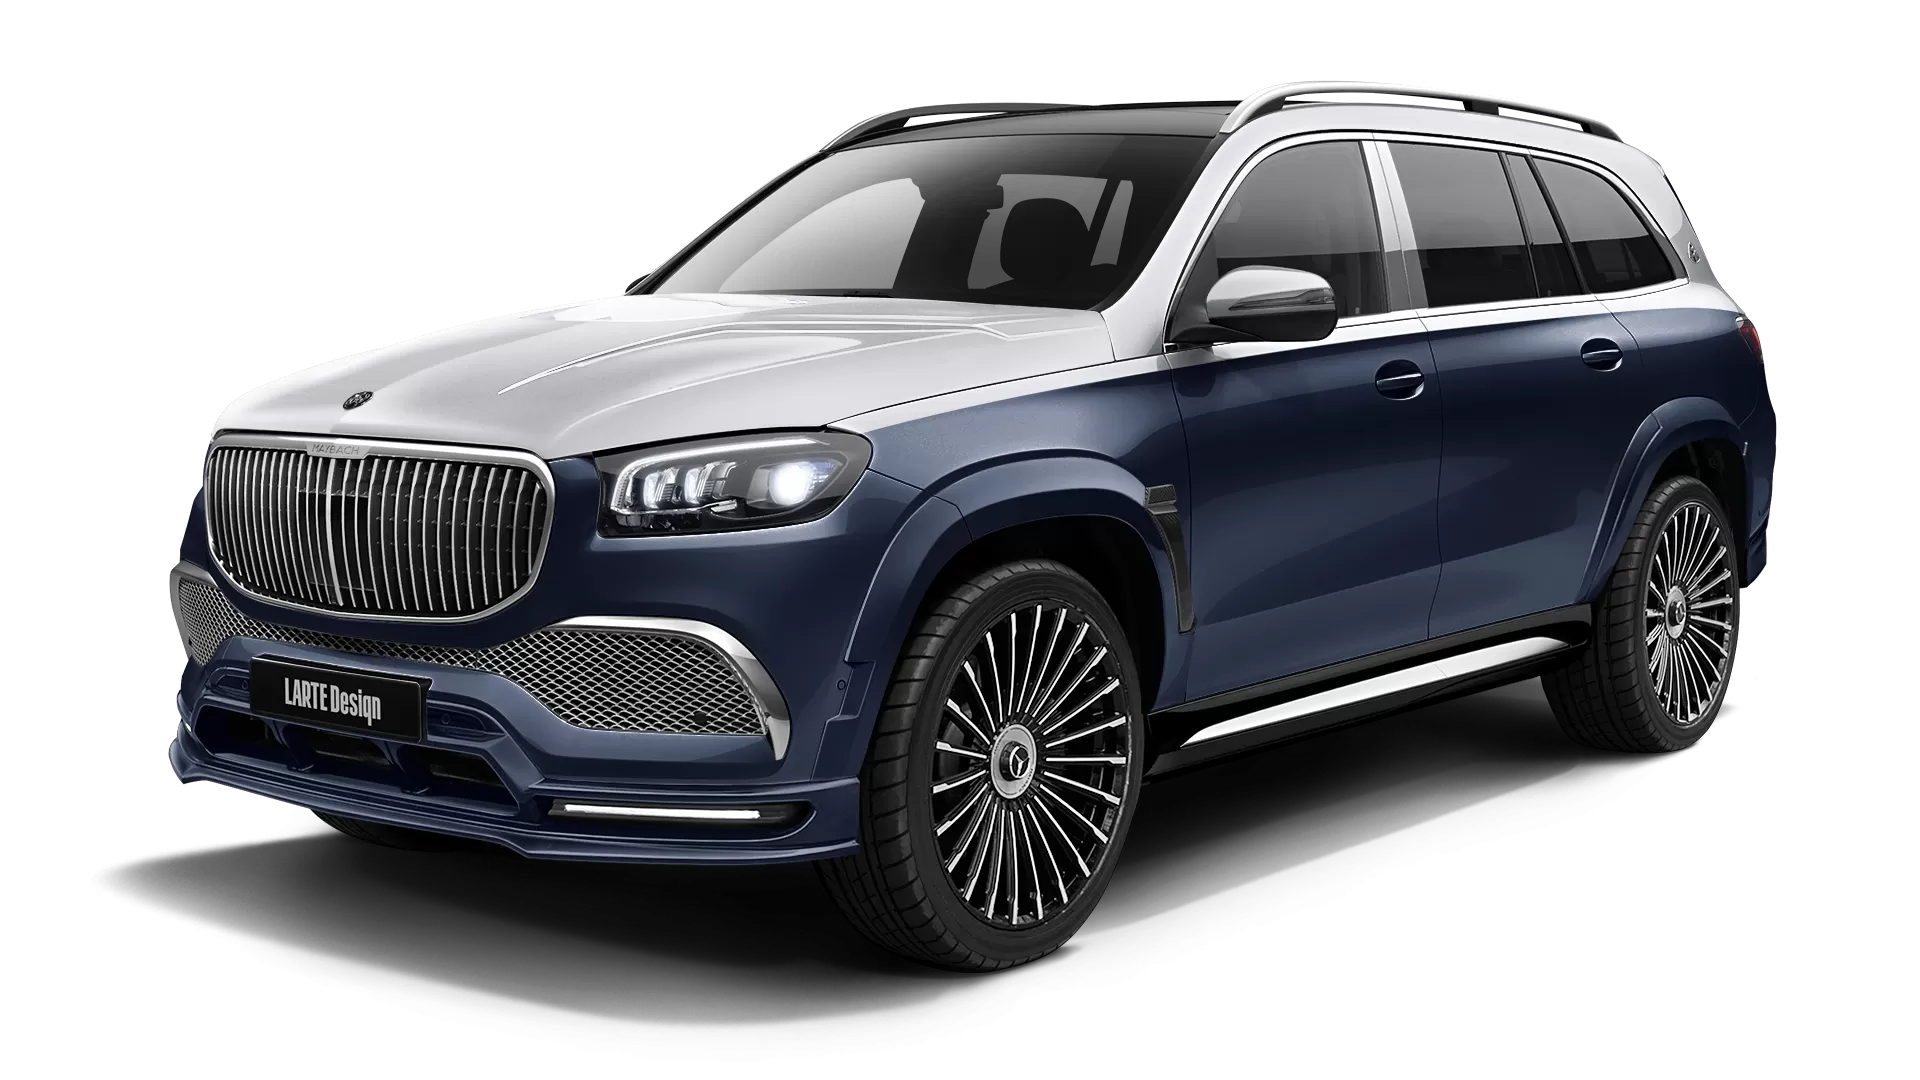 Mercedes Maybach GLS 600 with painted body kit: front view shown in Cavansite Blue & Iridium Silver